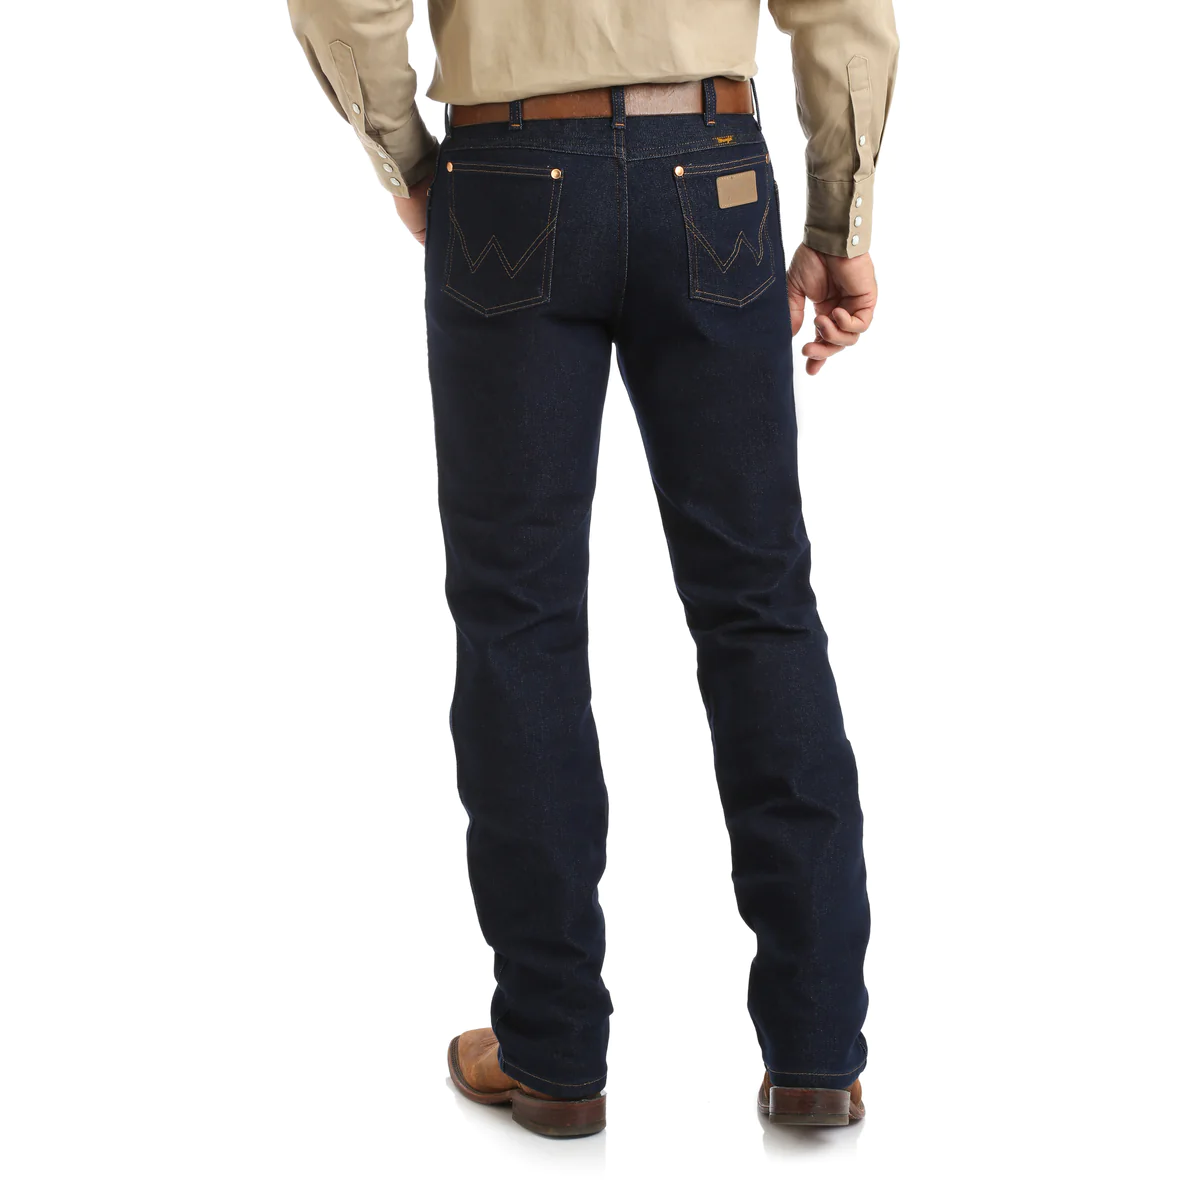 Wrangler Active Flex Jeans: Unstoppable Western Style – The Boot Jack